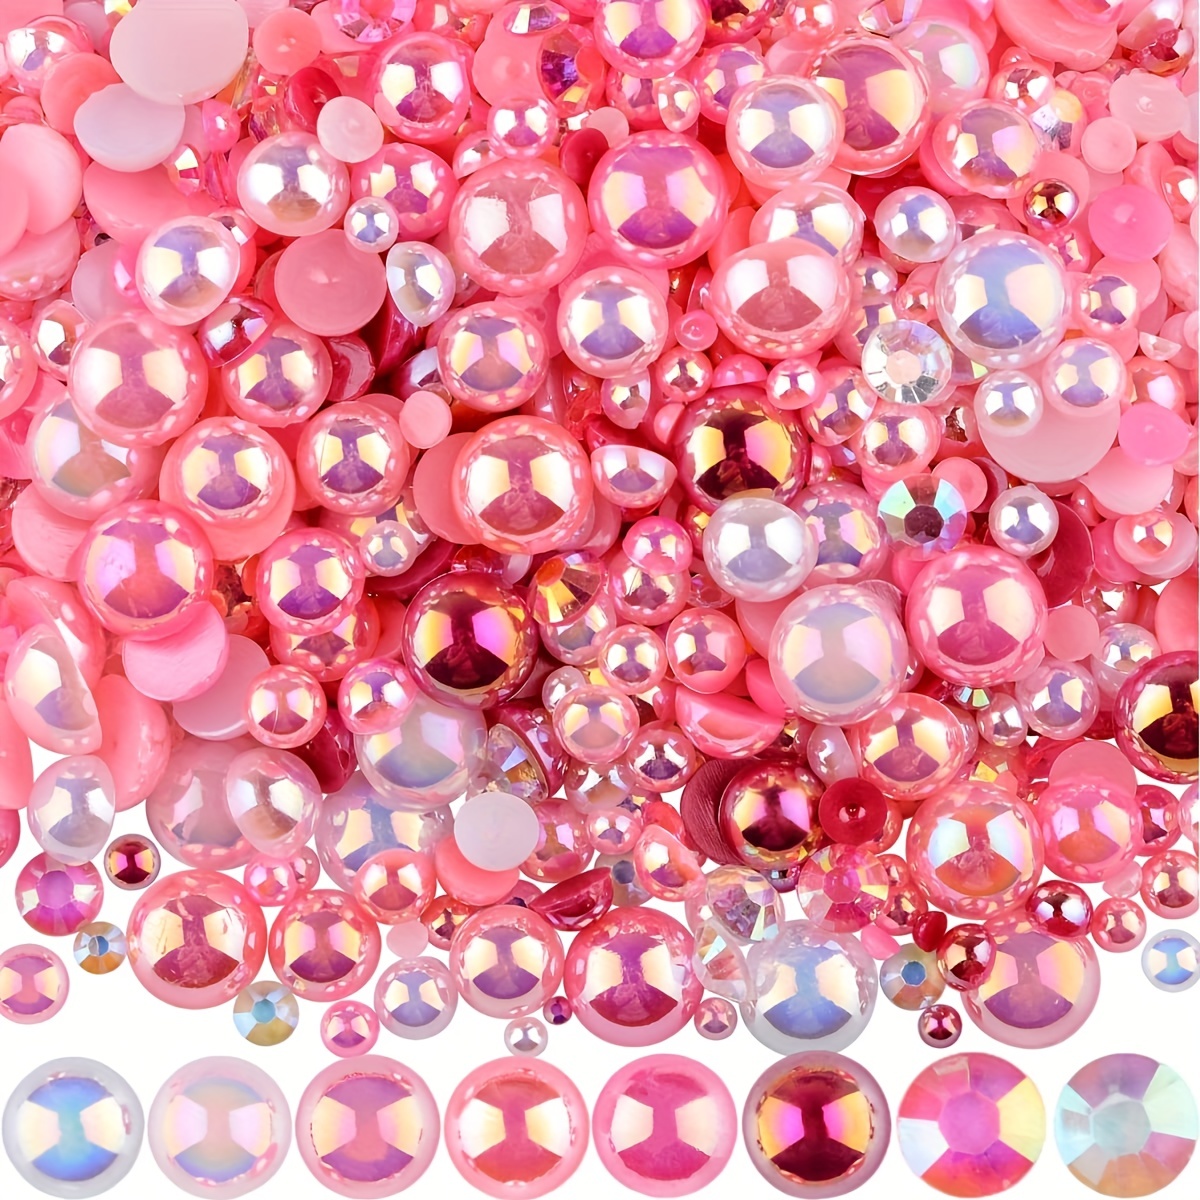  Towenm 60g Mix Flatback Pearls and Rhinestones, 2mm-10mm Jelly  Rhinestones and Half Pearls for Tumblers Shoes Nails Face Art, Pearl  Rhinestone Mix for Bedazzling, Pinks, Yellow